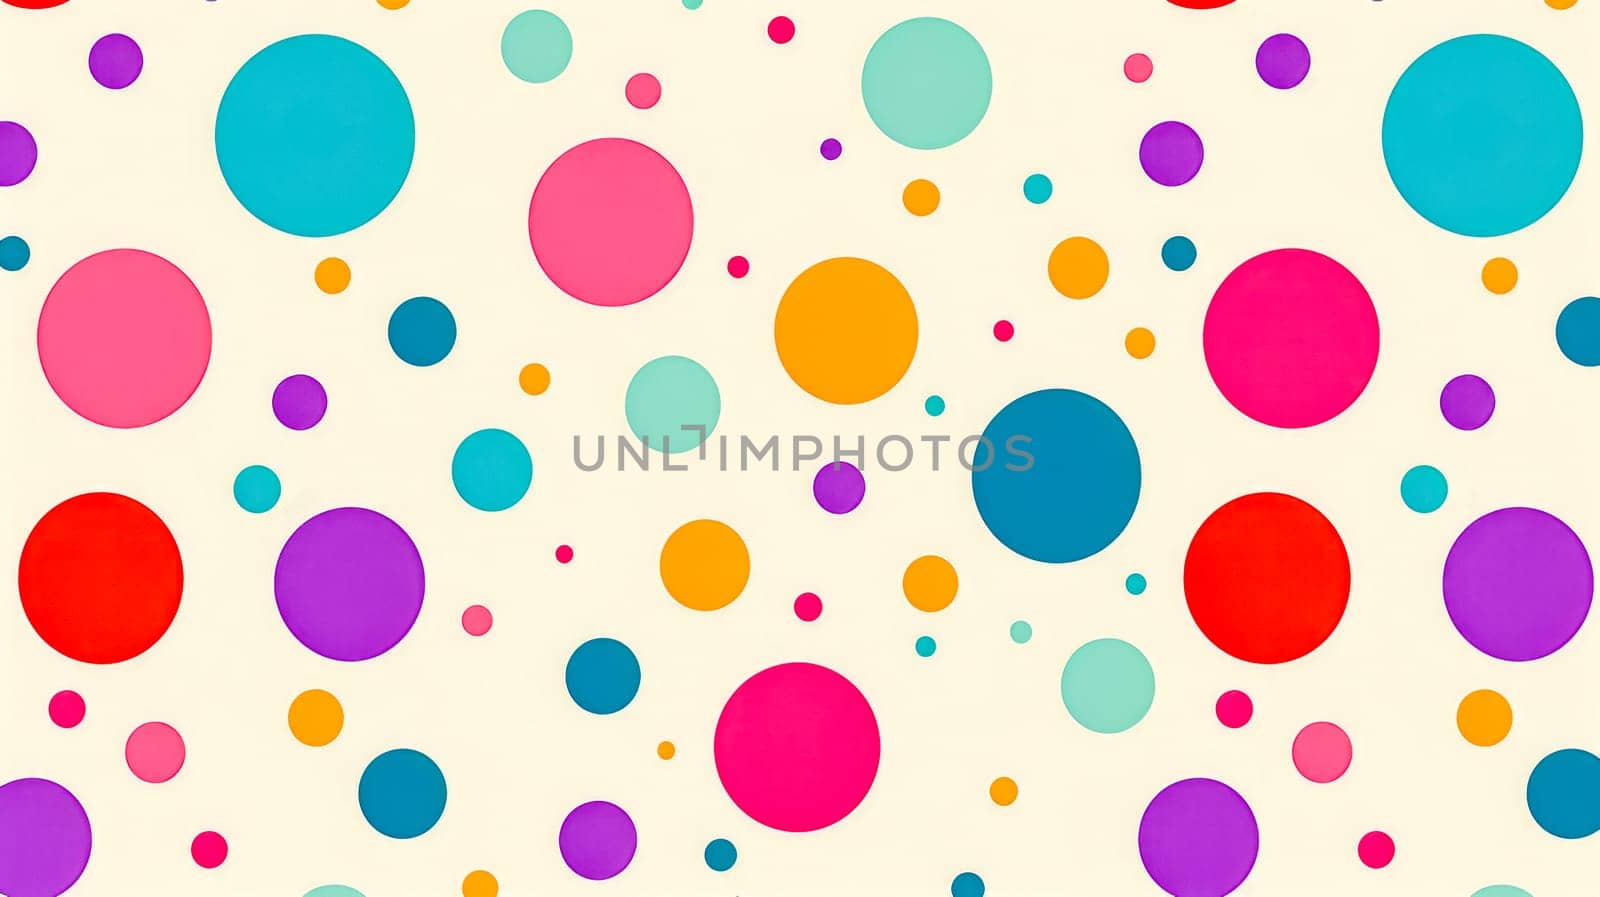 Vibrant and playful pattern of multicolored circles scattered on a light cream backdrop